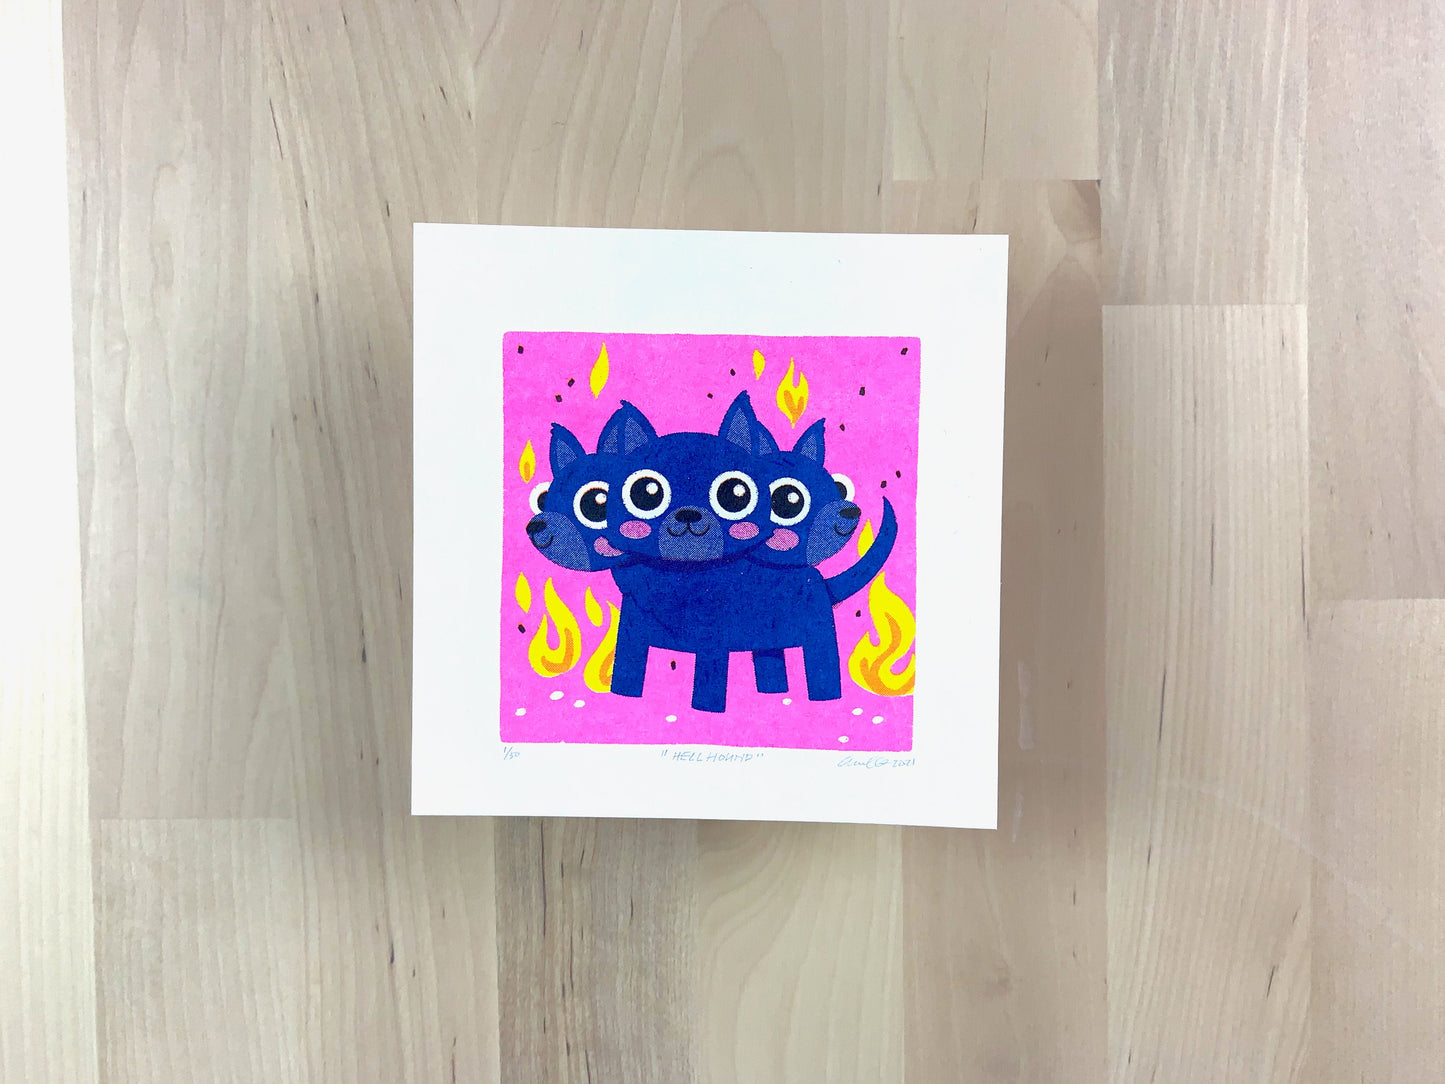 Risograph print of a cute blue three headed dog (Cerberus) illustration on a neon pink background with flames.